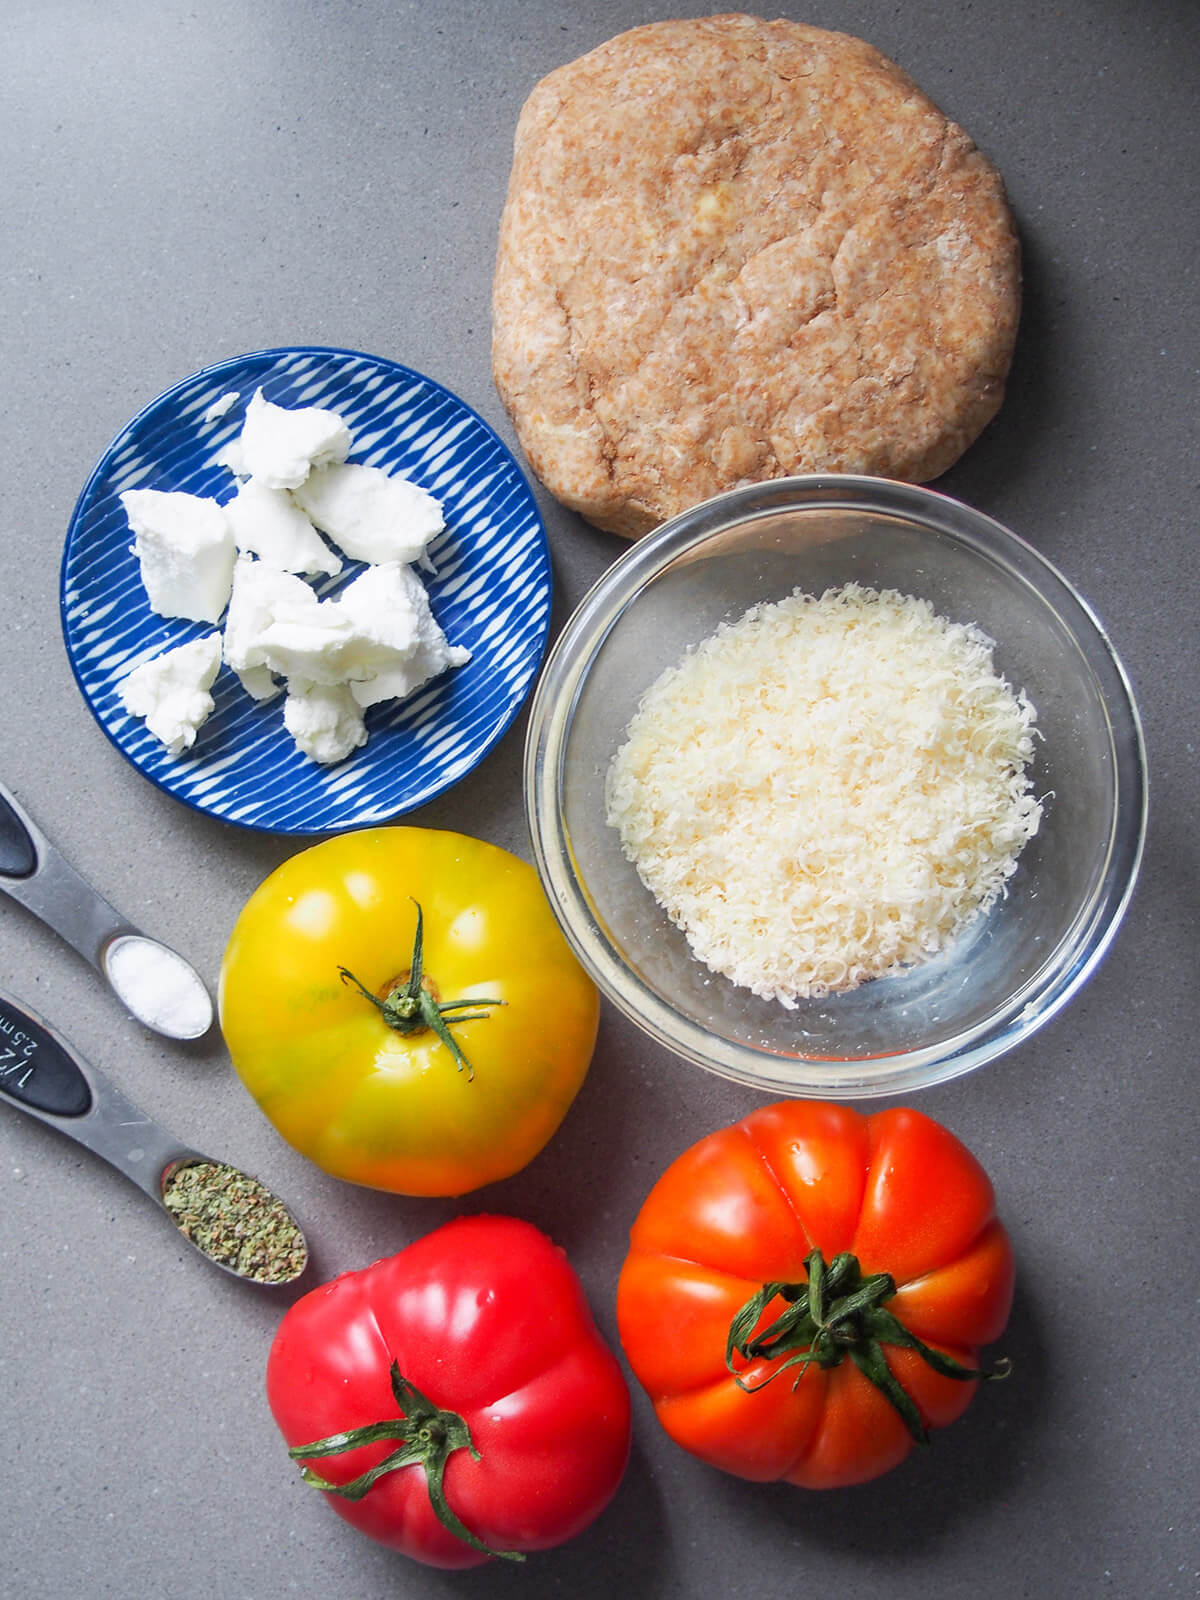 tomatoes, pastry dough, bowl with parmesan and dish with goat cheese